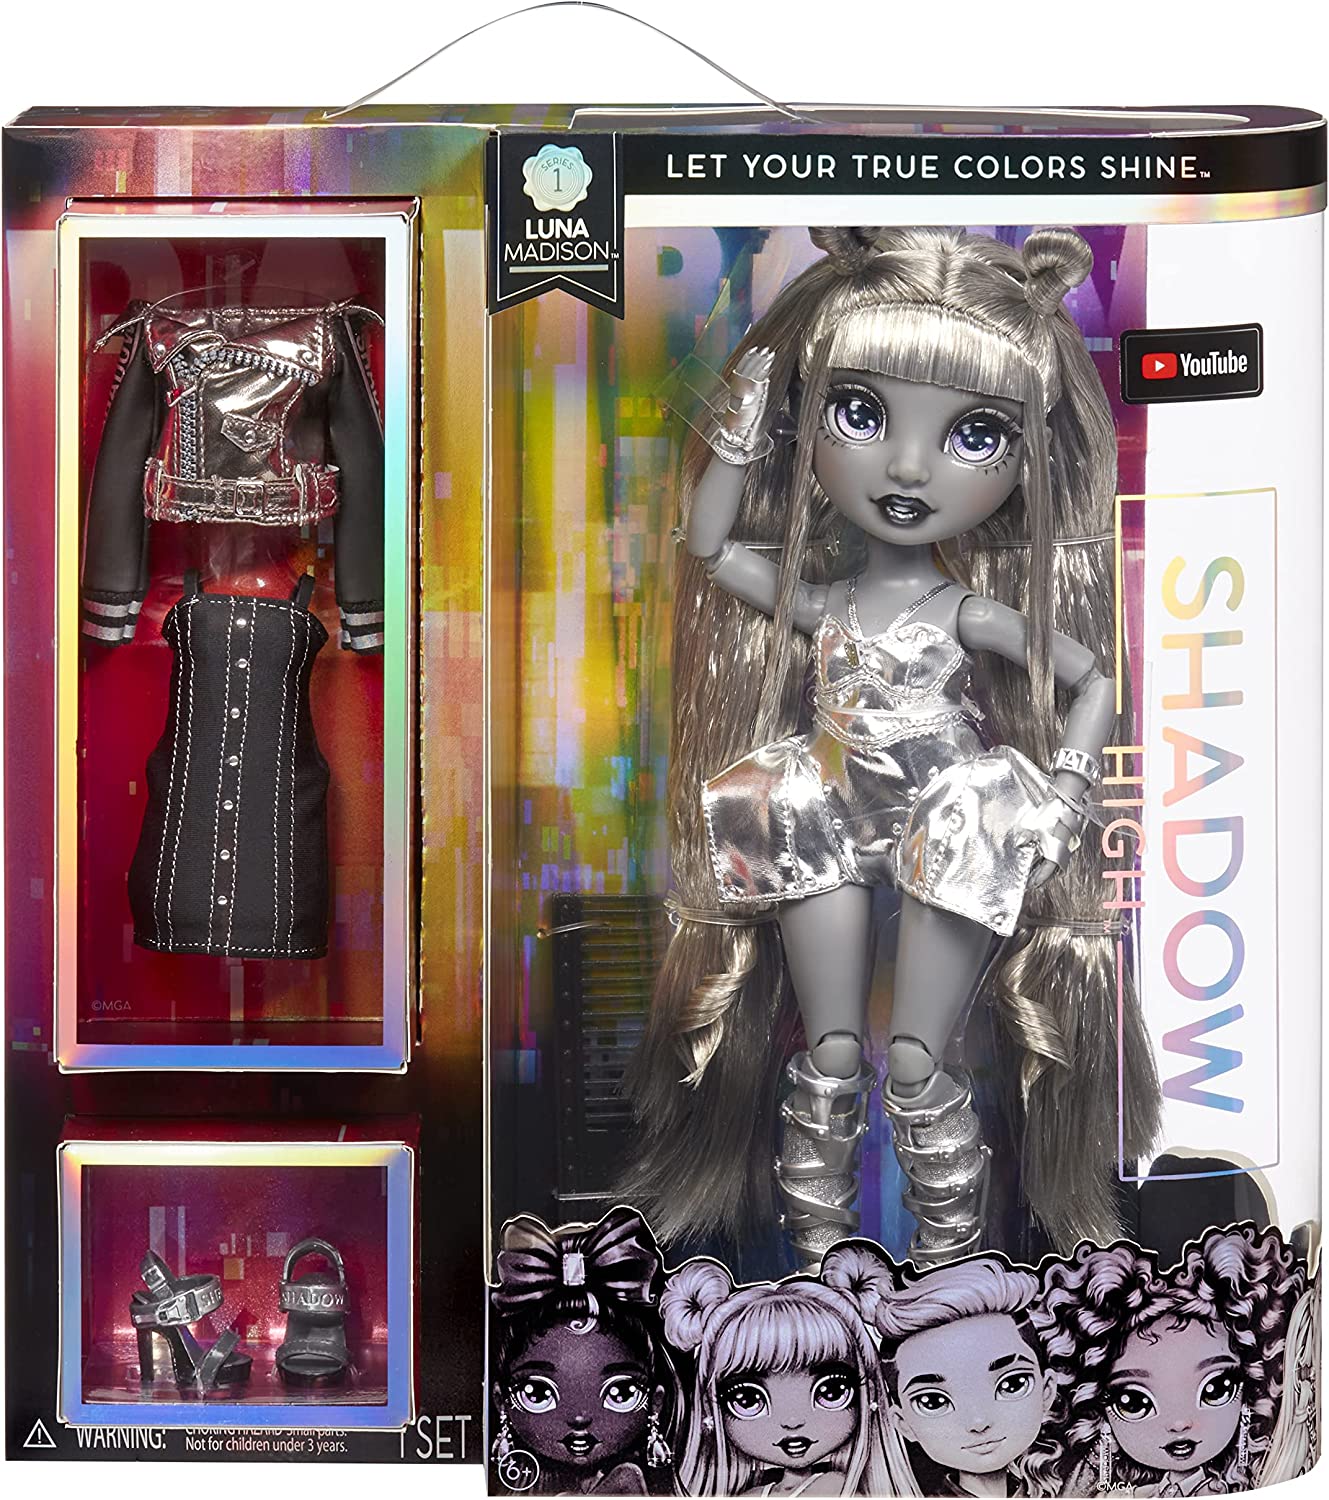 Rainbow High Shadow Series 1 Designer Outfits to Mix & Match with Accessories, Great Gift for Kids 6-12 Years Old and Collectors